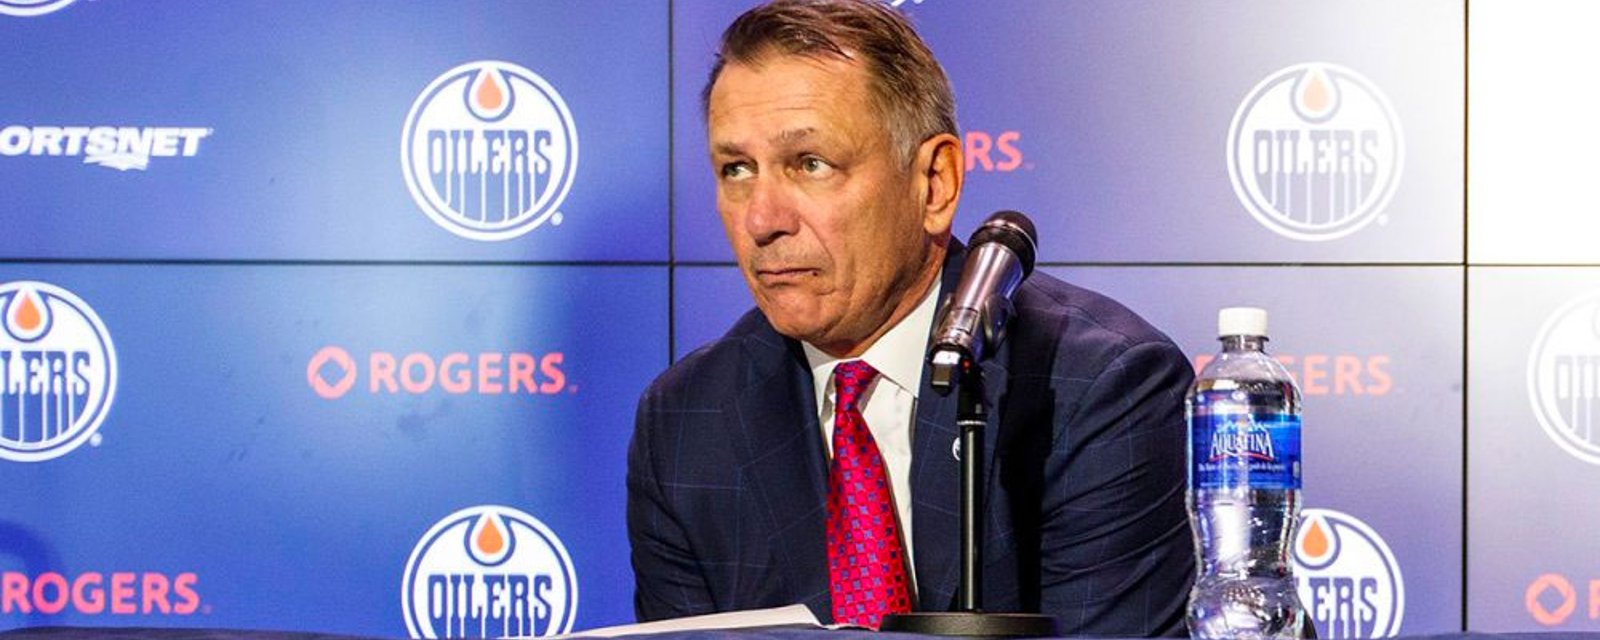 Ken Holland confirms the identity of lone unvaccinated Oilers player